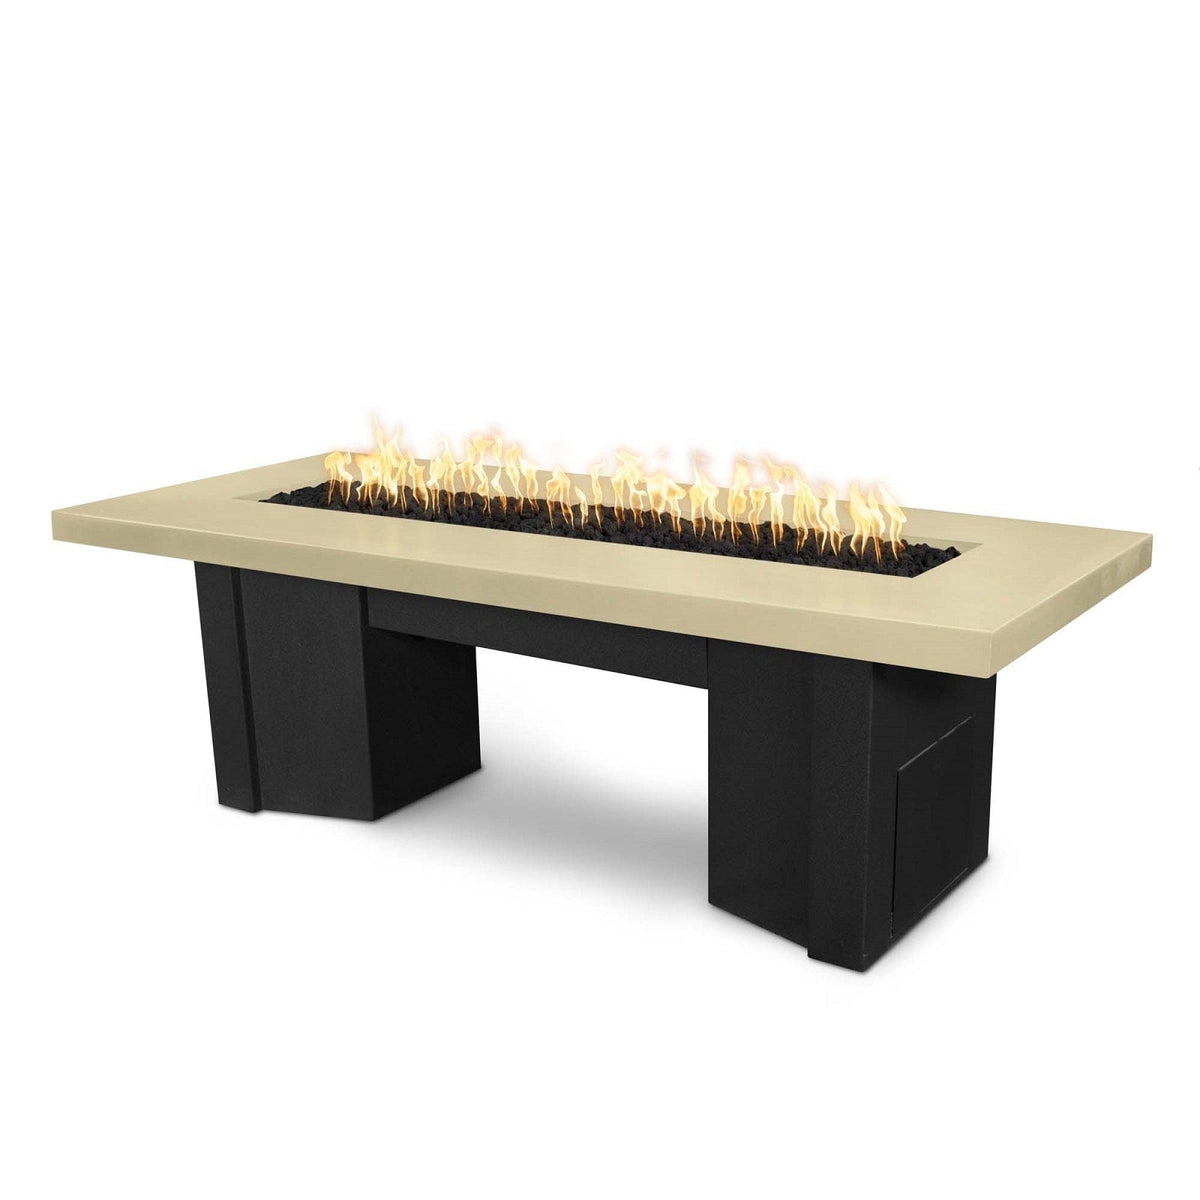 The Outdoor Plus Fire Features Vanilla (-VAN) / Black Powder Coated Steel (-BLK) The Outdoor Plus 60&quot; Alameda Fire Table Smooth Concrete in Liquid Propane - Flame Sense System with Push Button Spark Igniter / OPT-ALMGFRC60FSEN-LP